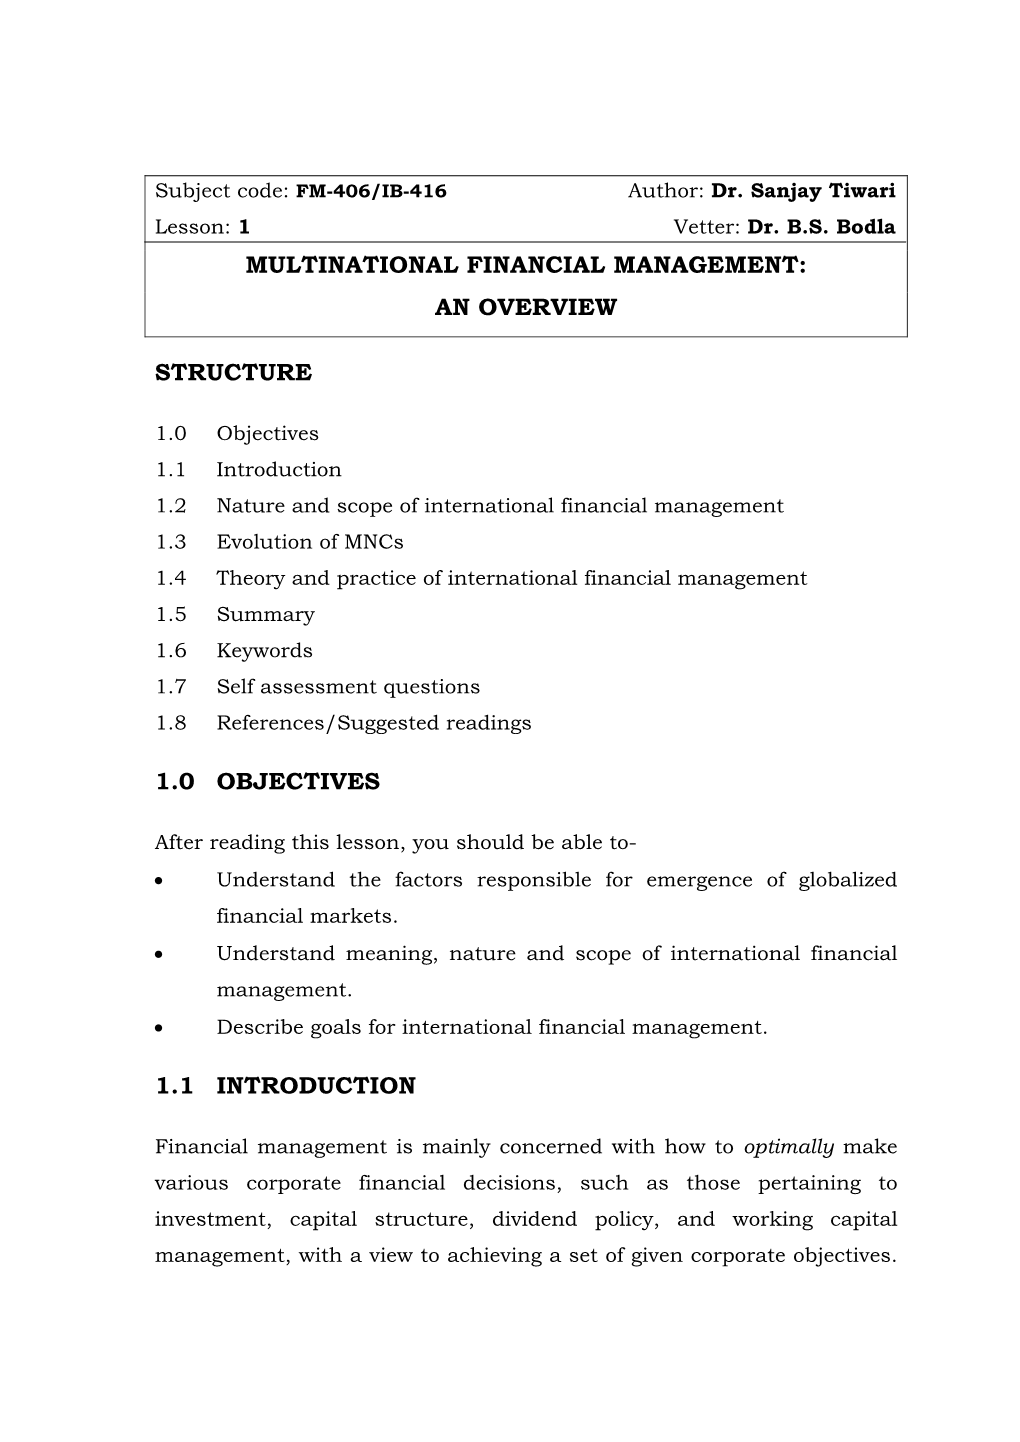 Multinational Financial Management: an Overview Structure 1.0 Objectives 1.1 Introduction